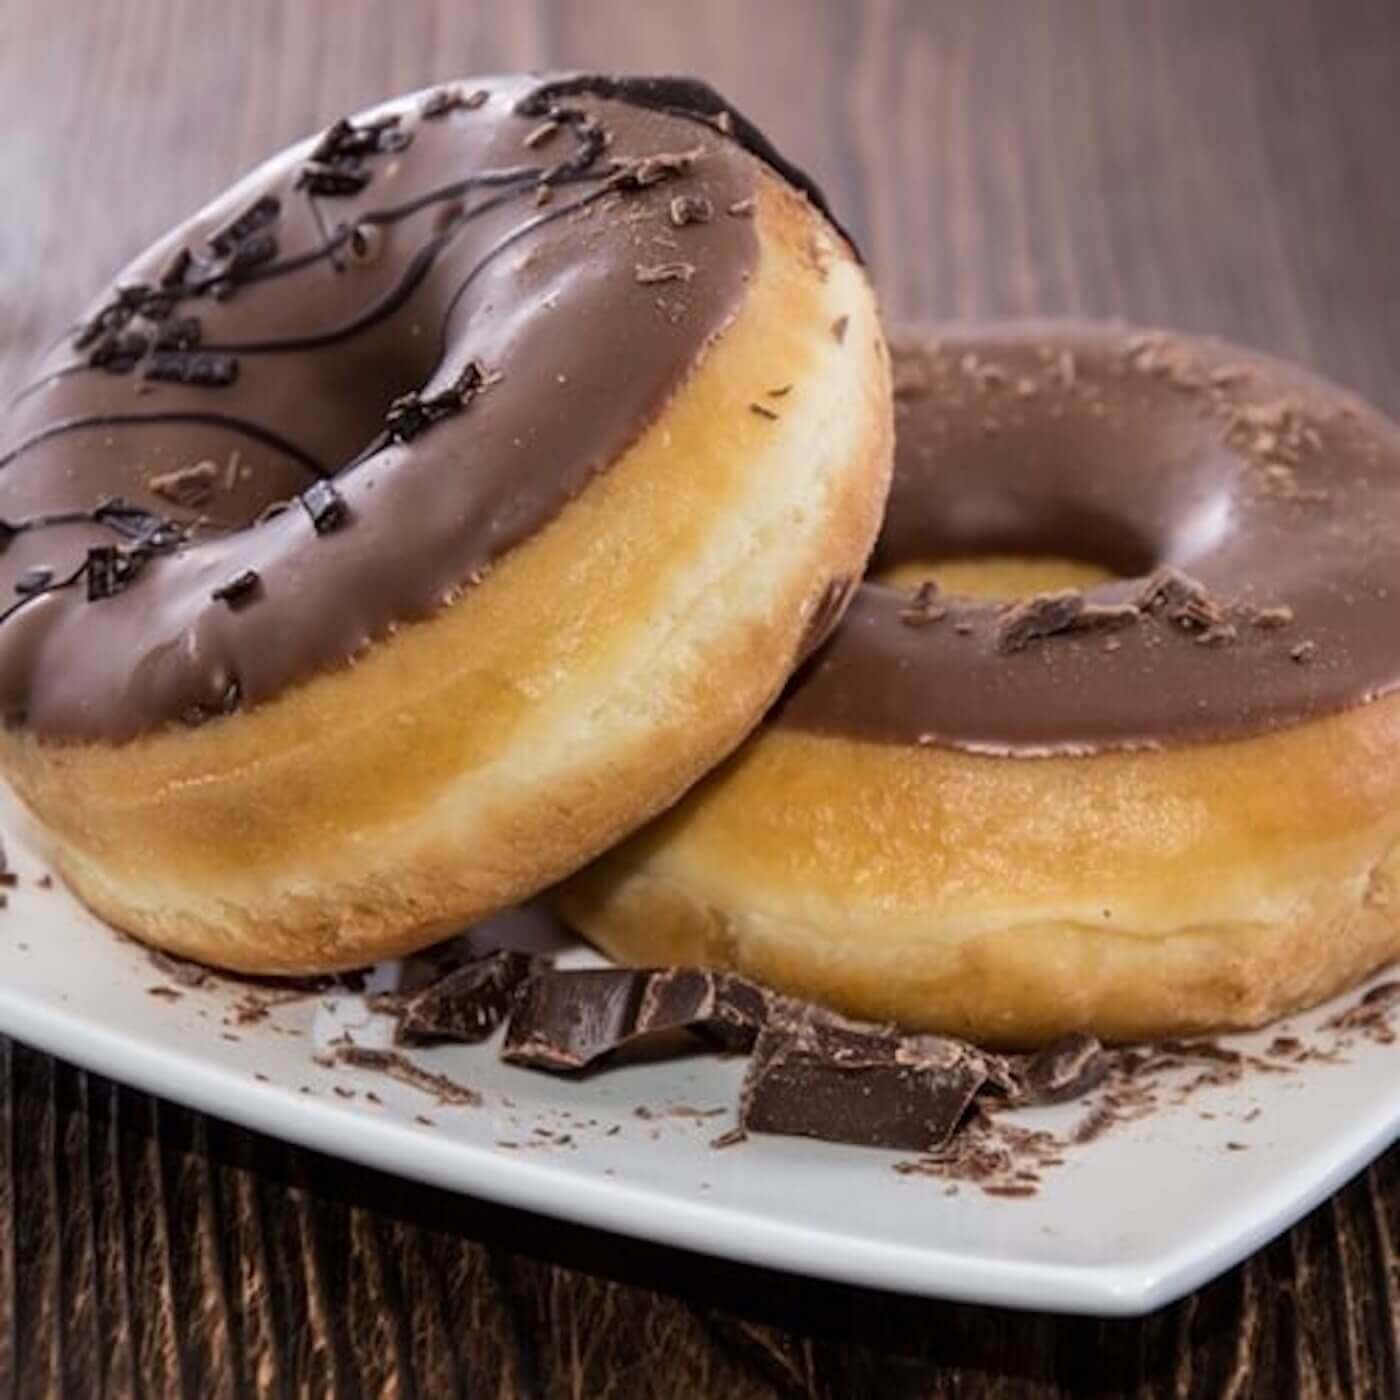 Two donuts with chocolate icing on a white plate